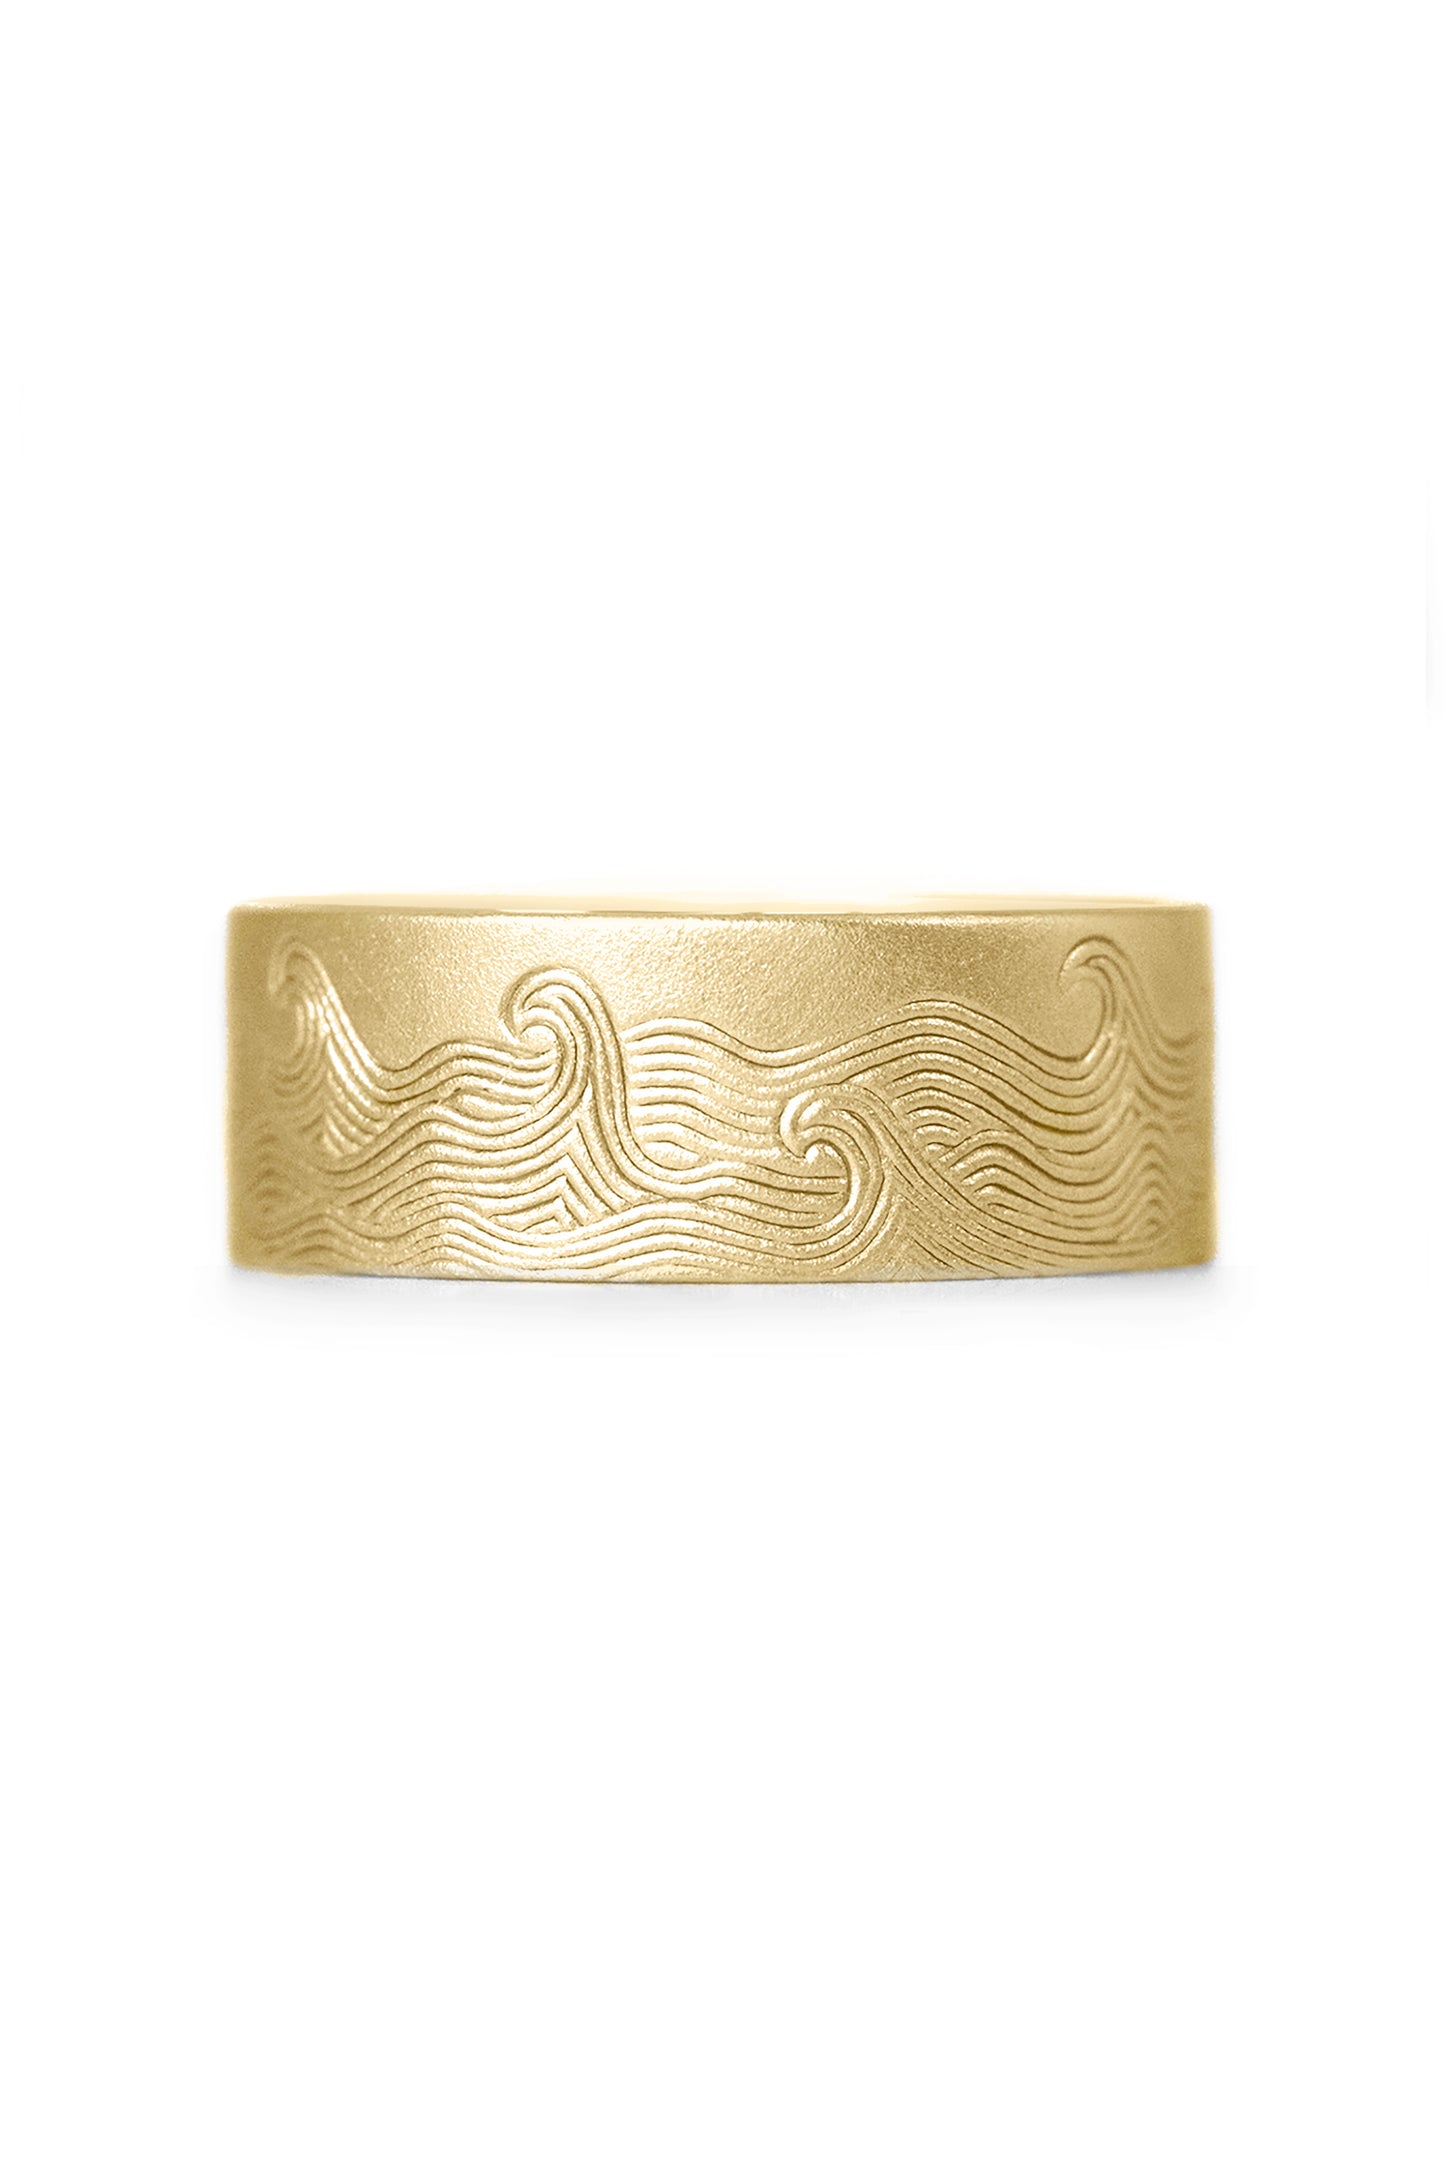 Swell Engraved Band